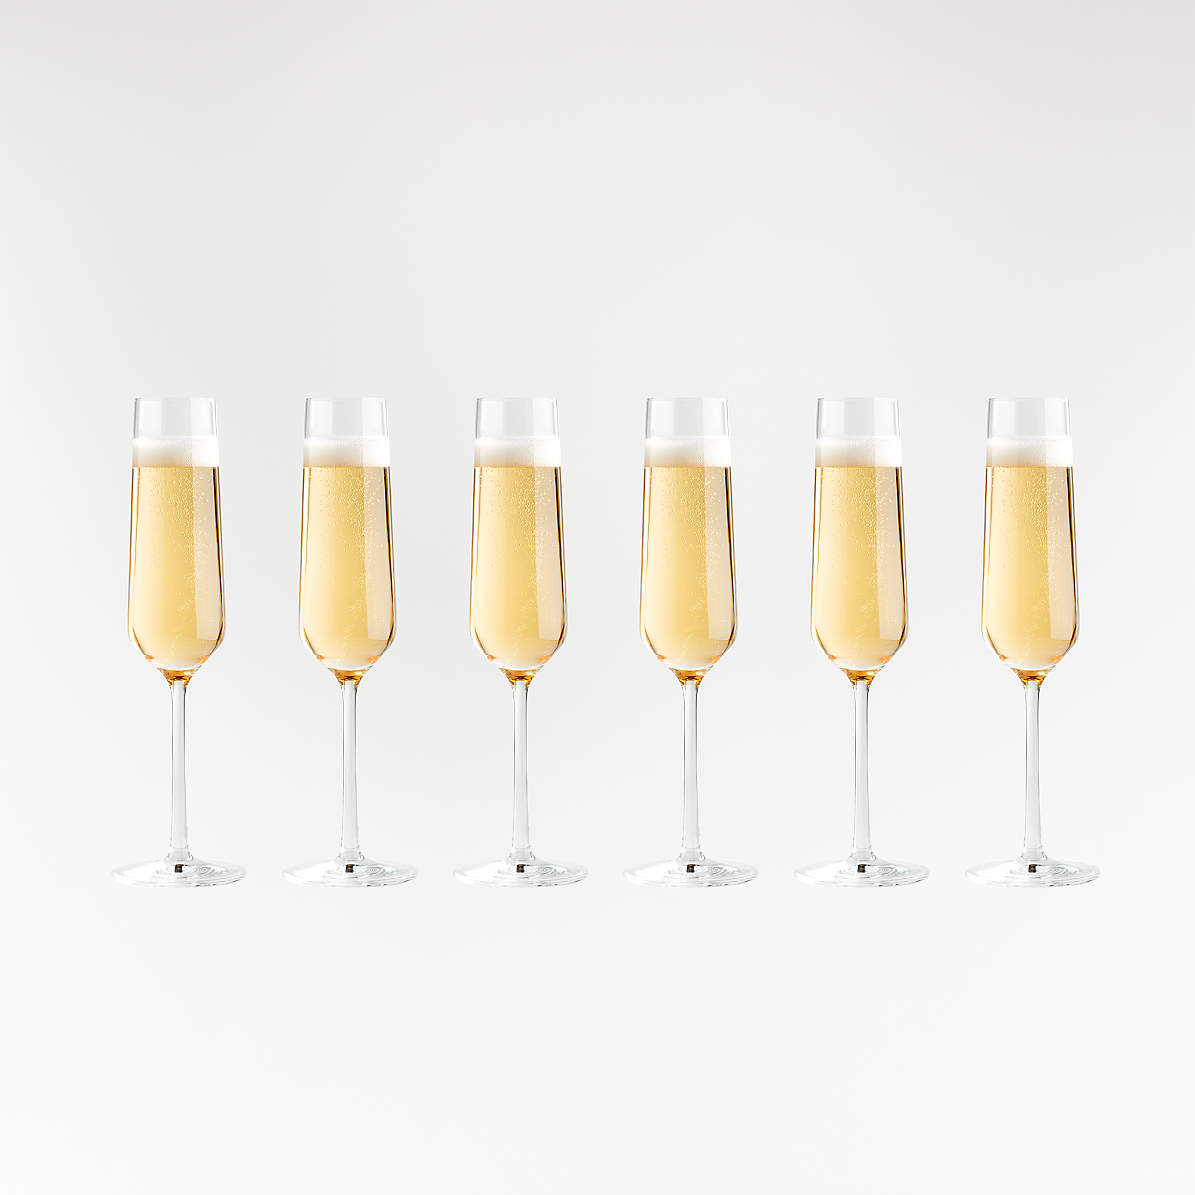 Schott Zwiesel Pure Tour Champagne Flutes Prosecco Glasses, Set of 6 +  Reviews